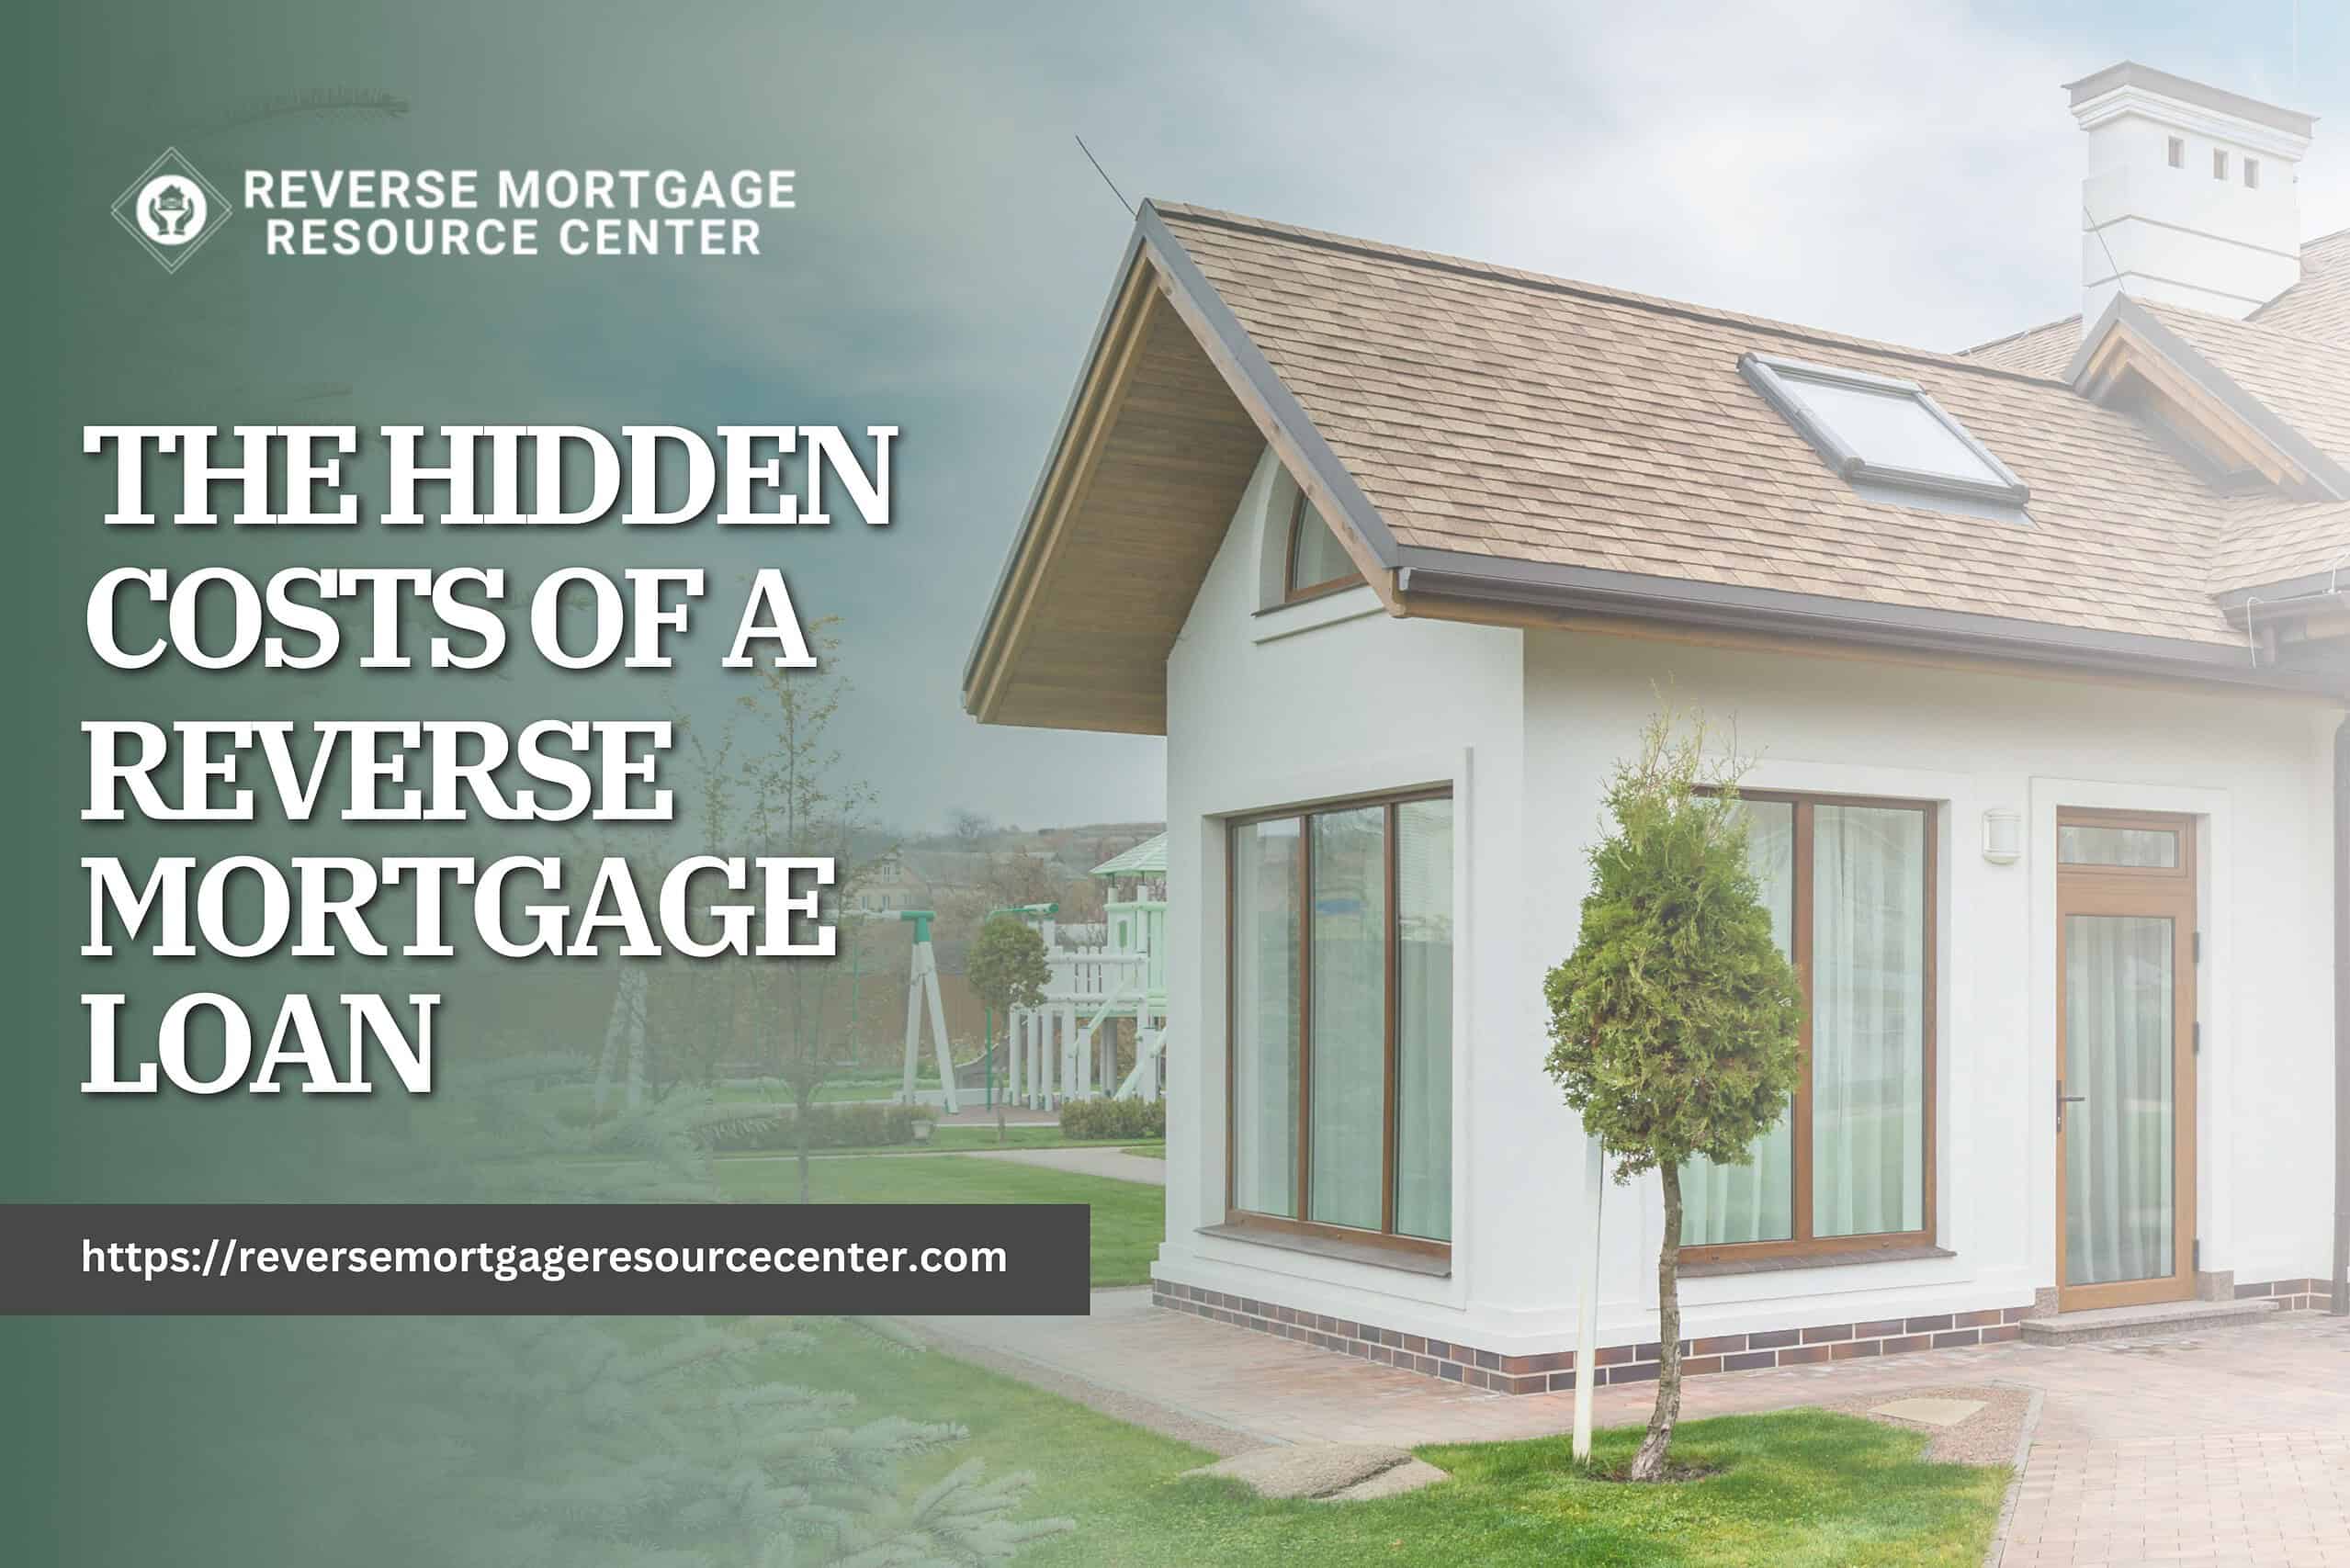 The Hidden Costs Of A Reverse Mortgage Loan